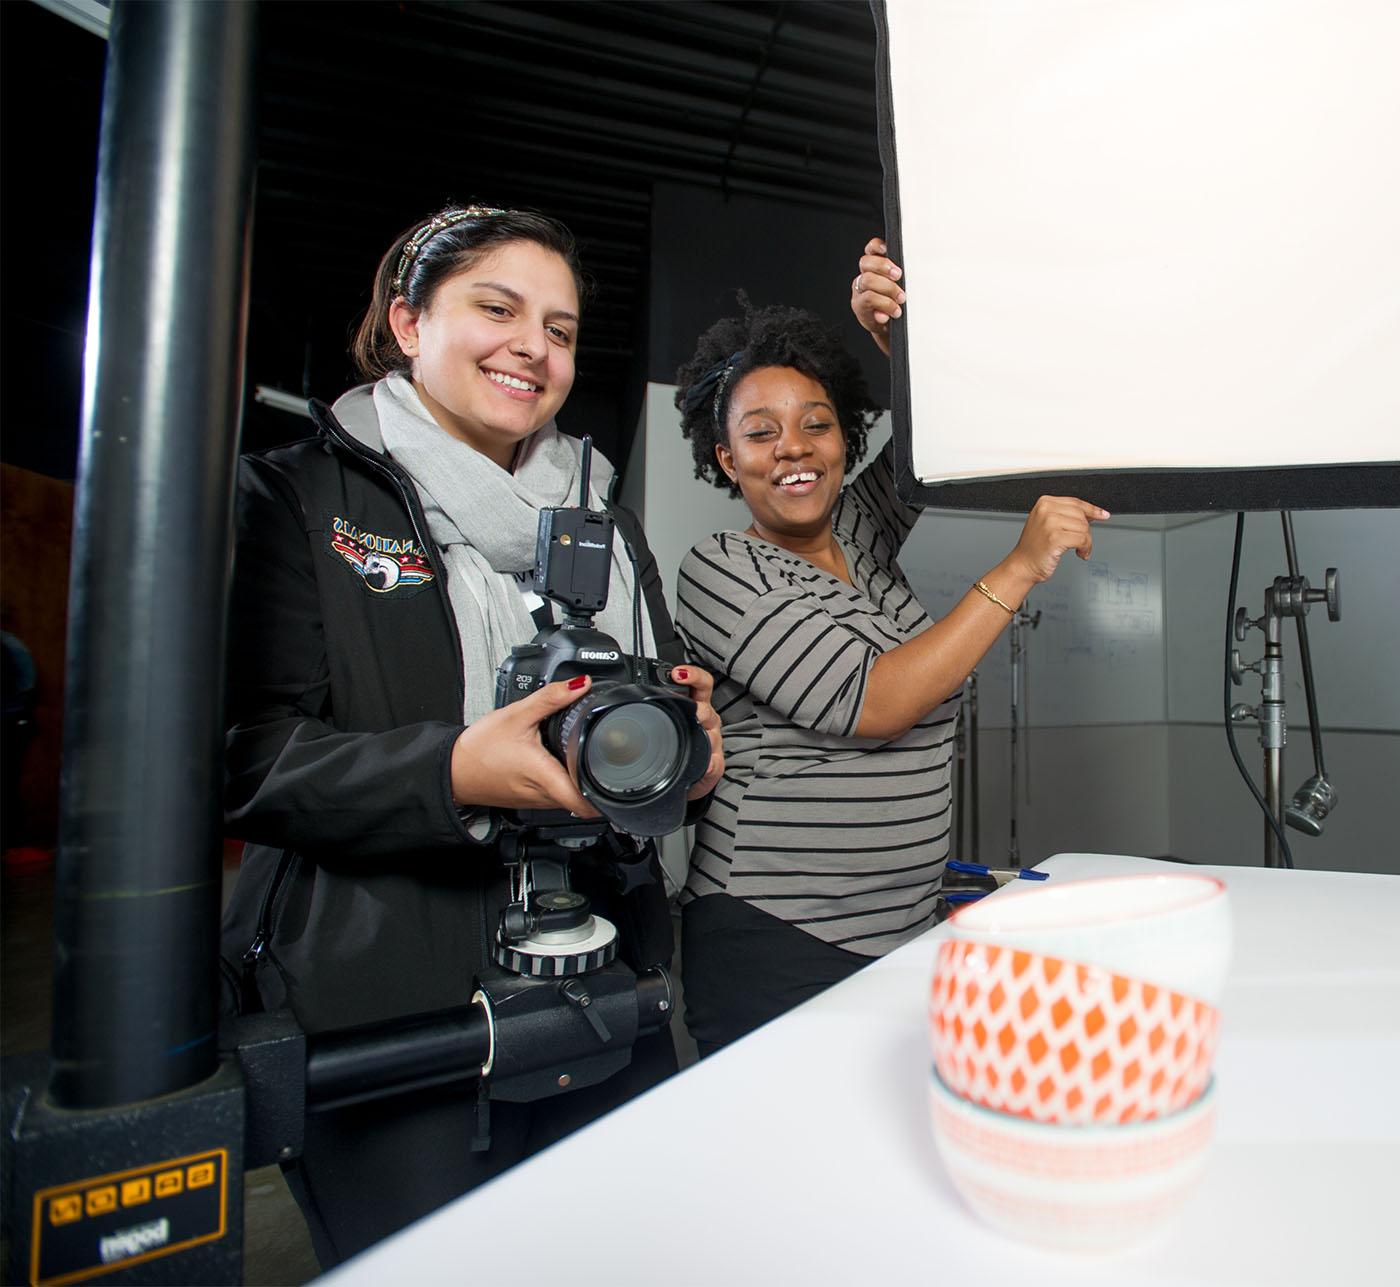 Two female students working together on a photography project.